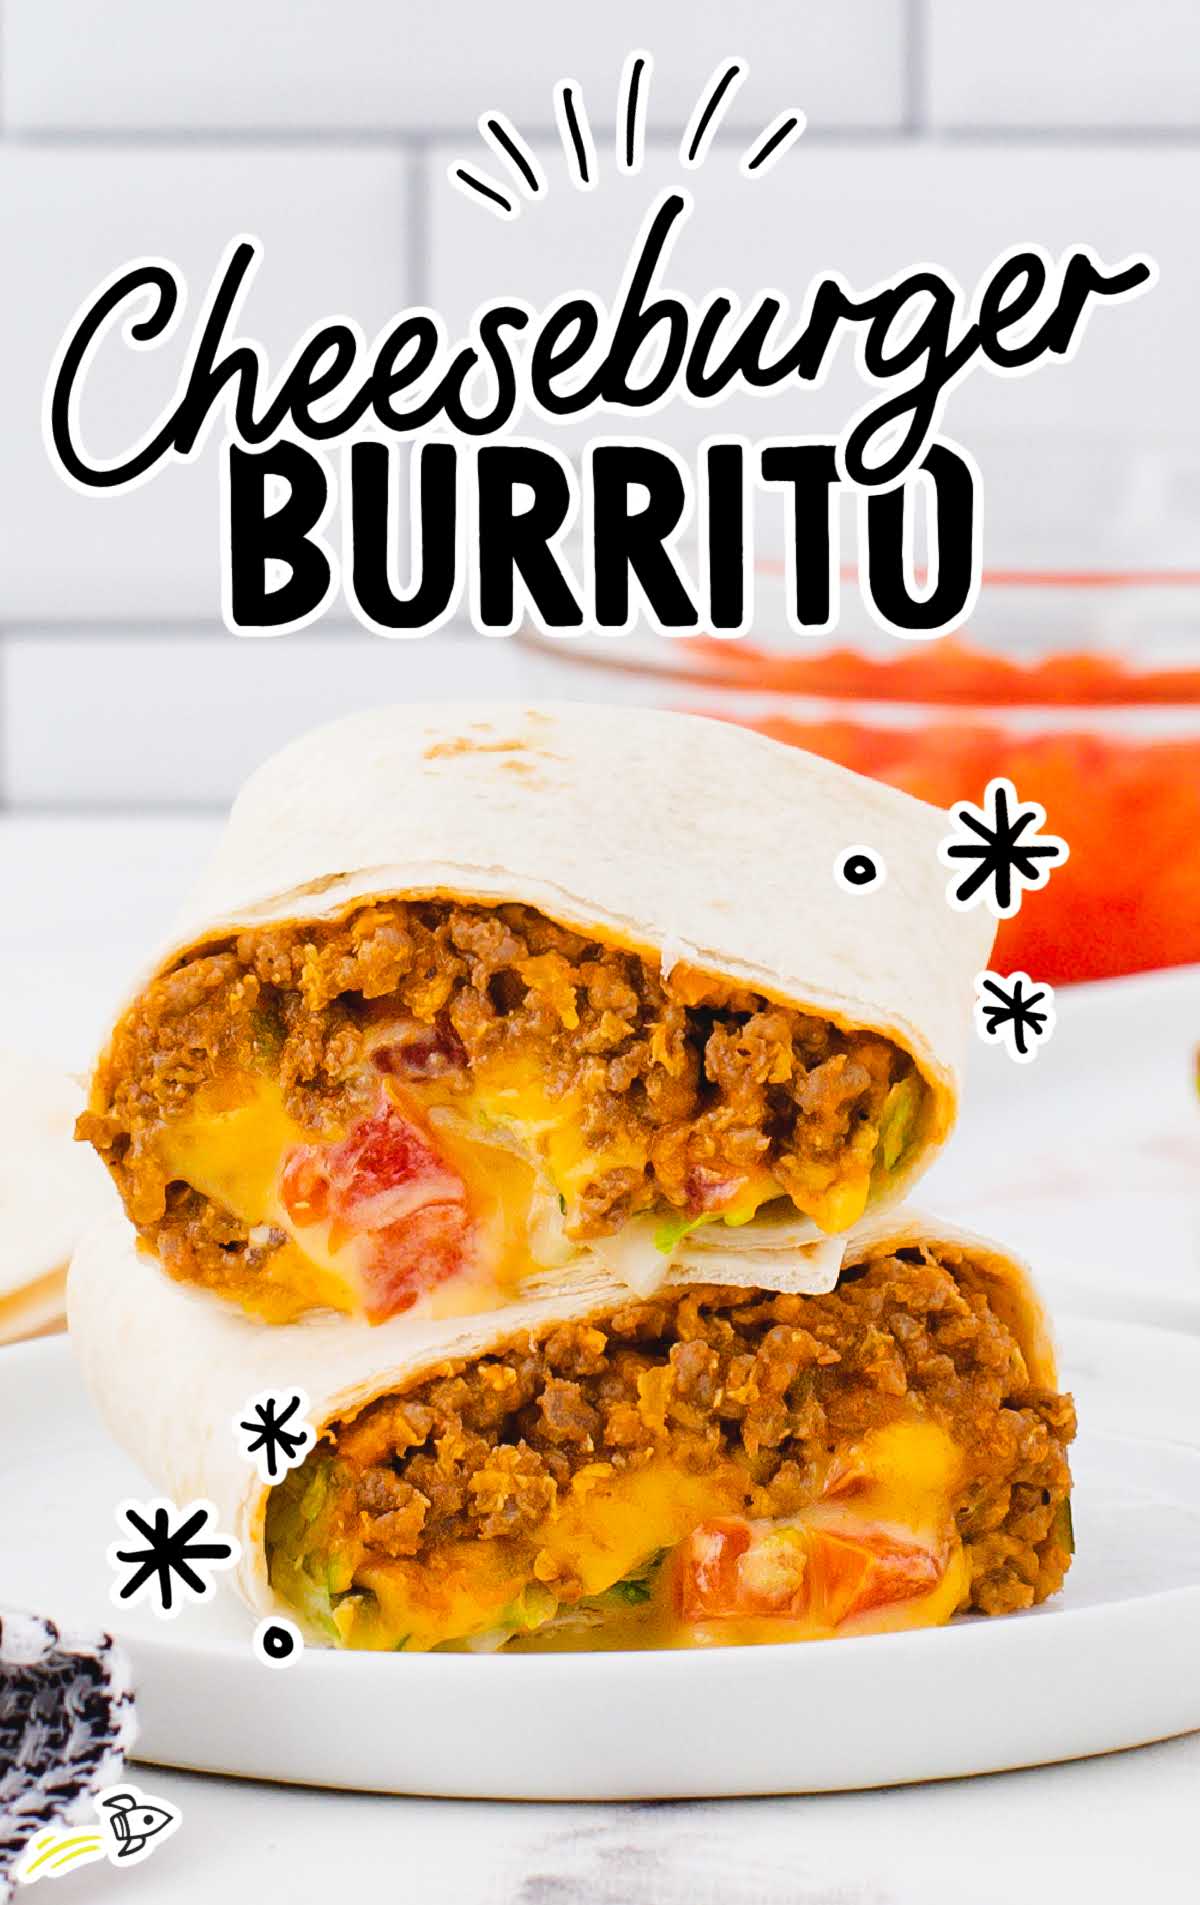 A close up shot of a Cheeseburger Burrito split in half on a plate